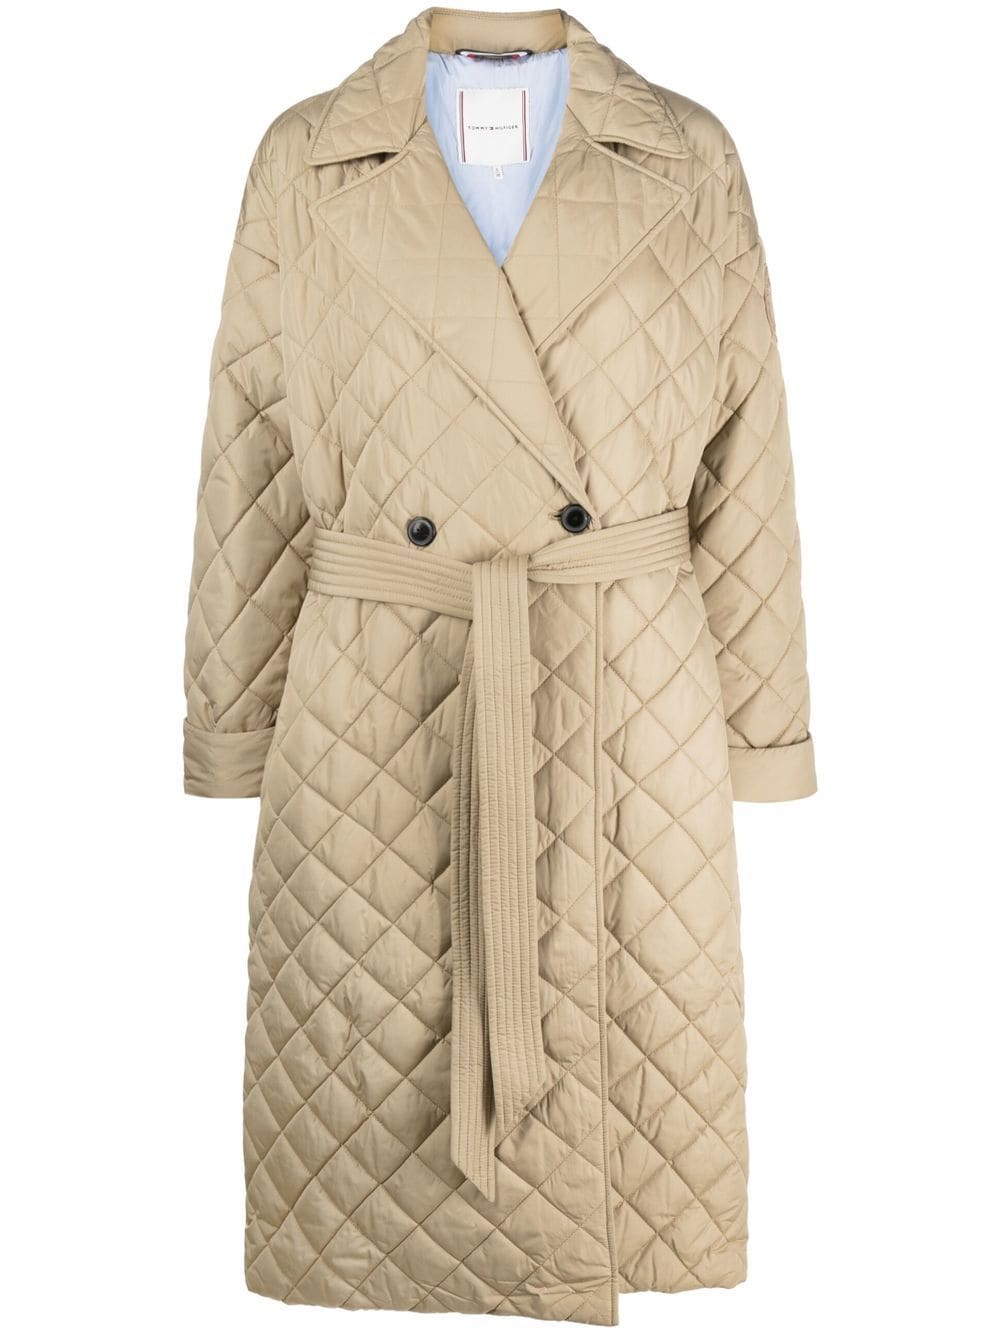 Hilfiger - Sorona Farfetch Belted Quilted Tommy Coat